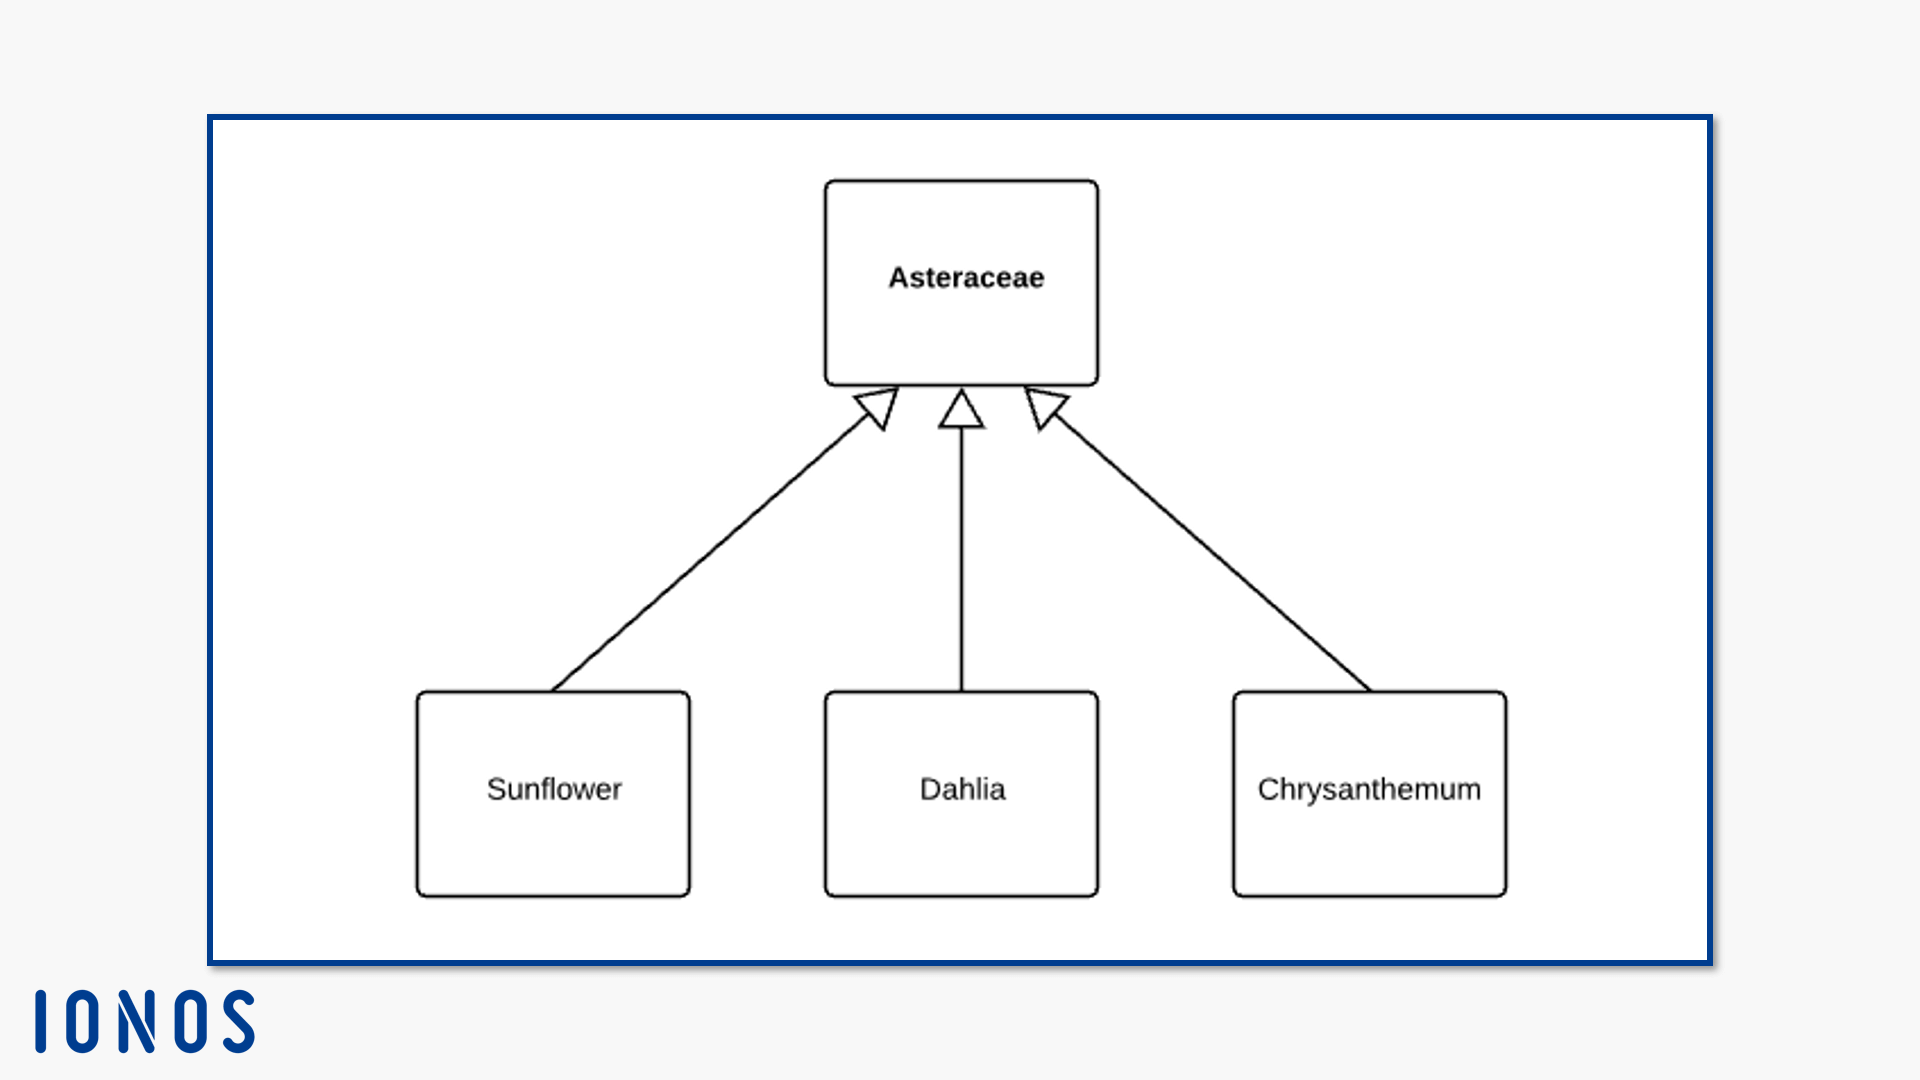 Generalization of the sunflower, dahlia, and chrysanthemum subclasses to the daisy superclass.